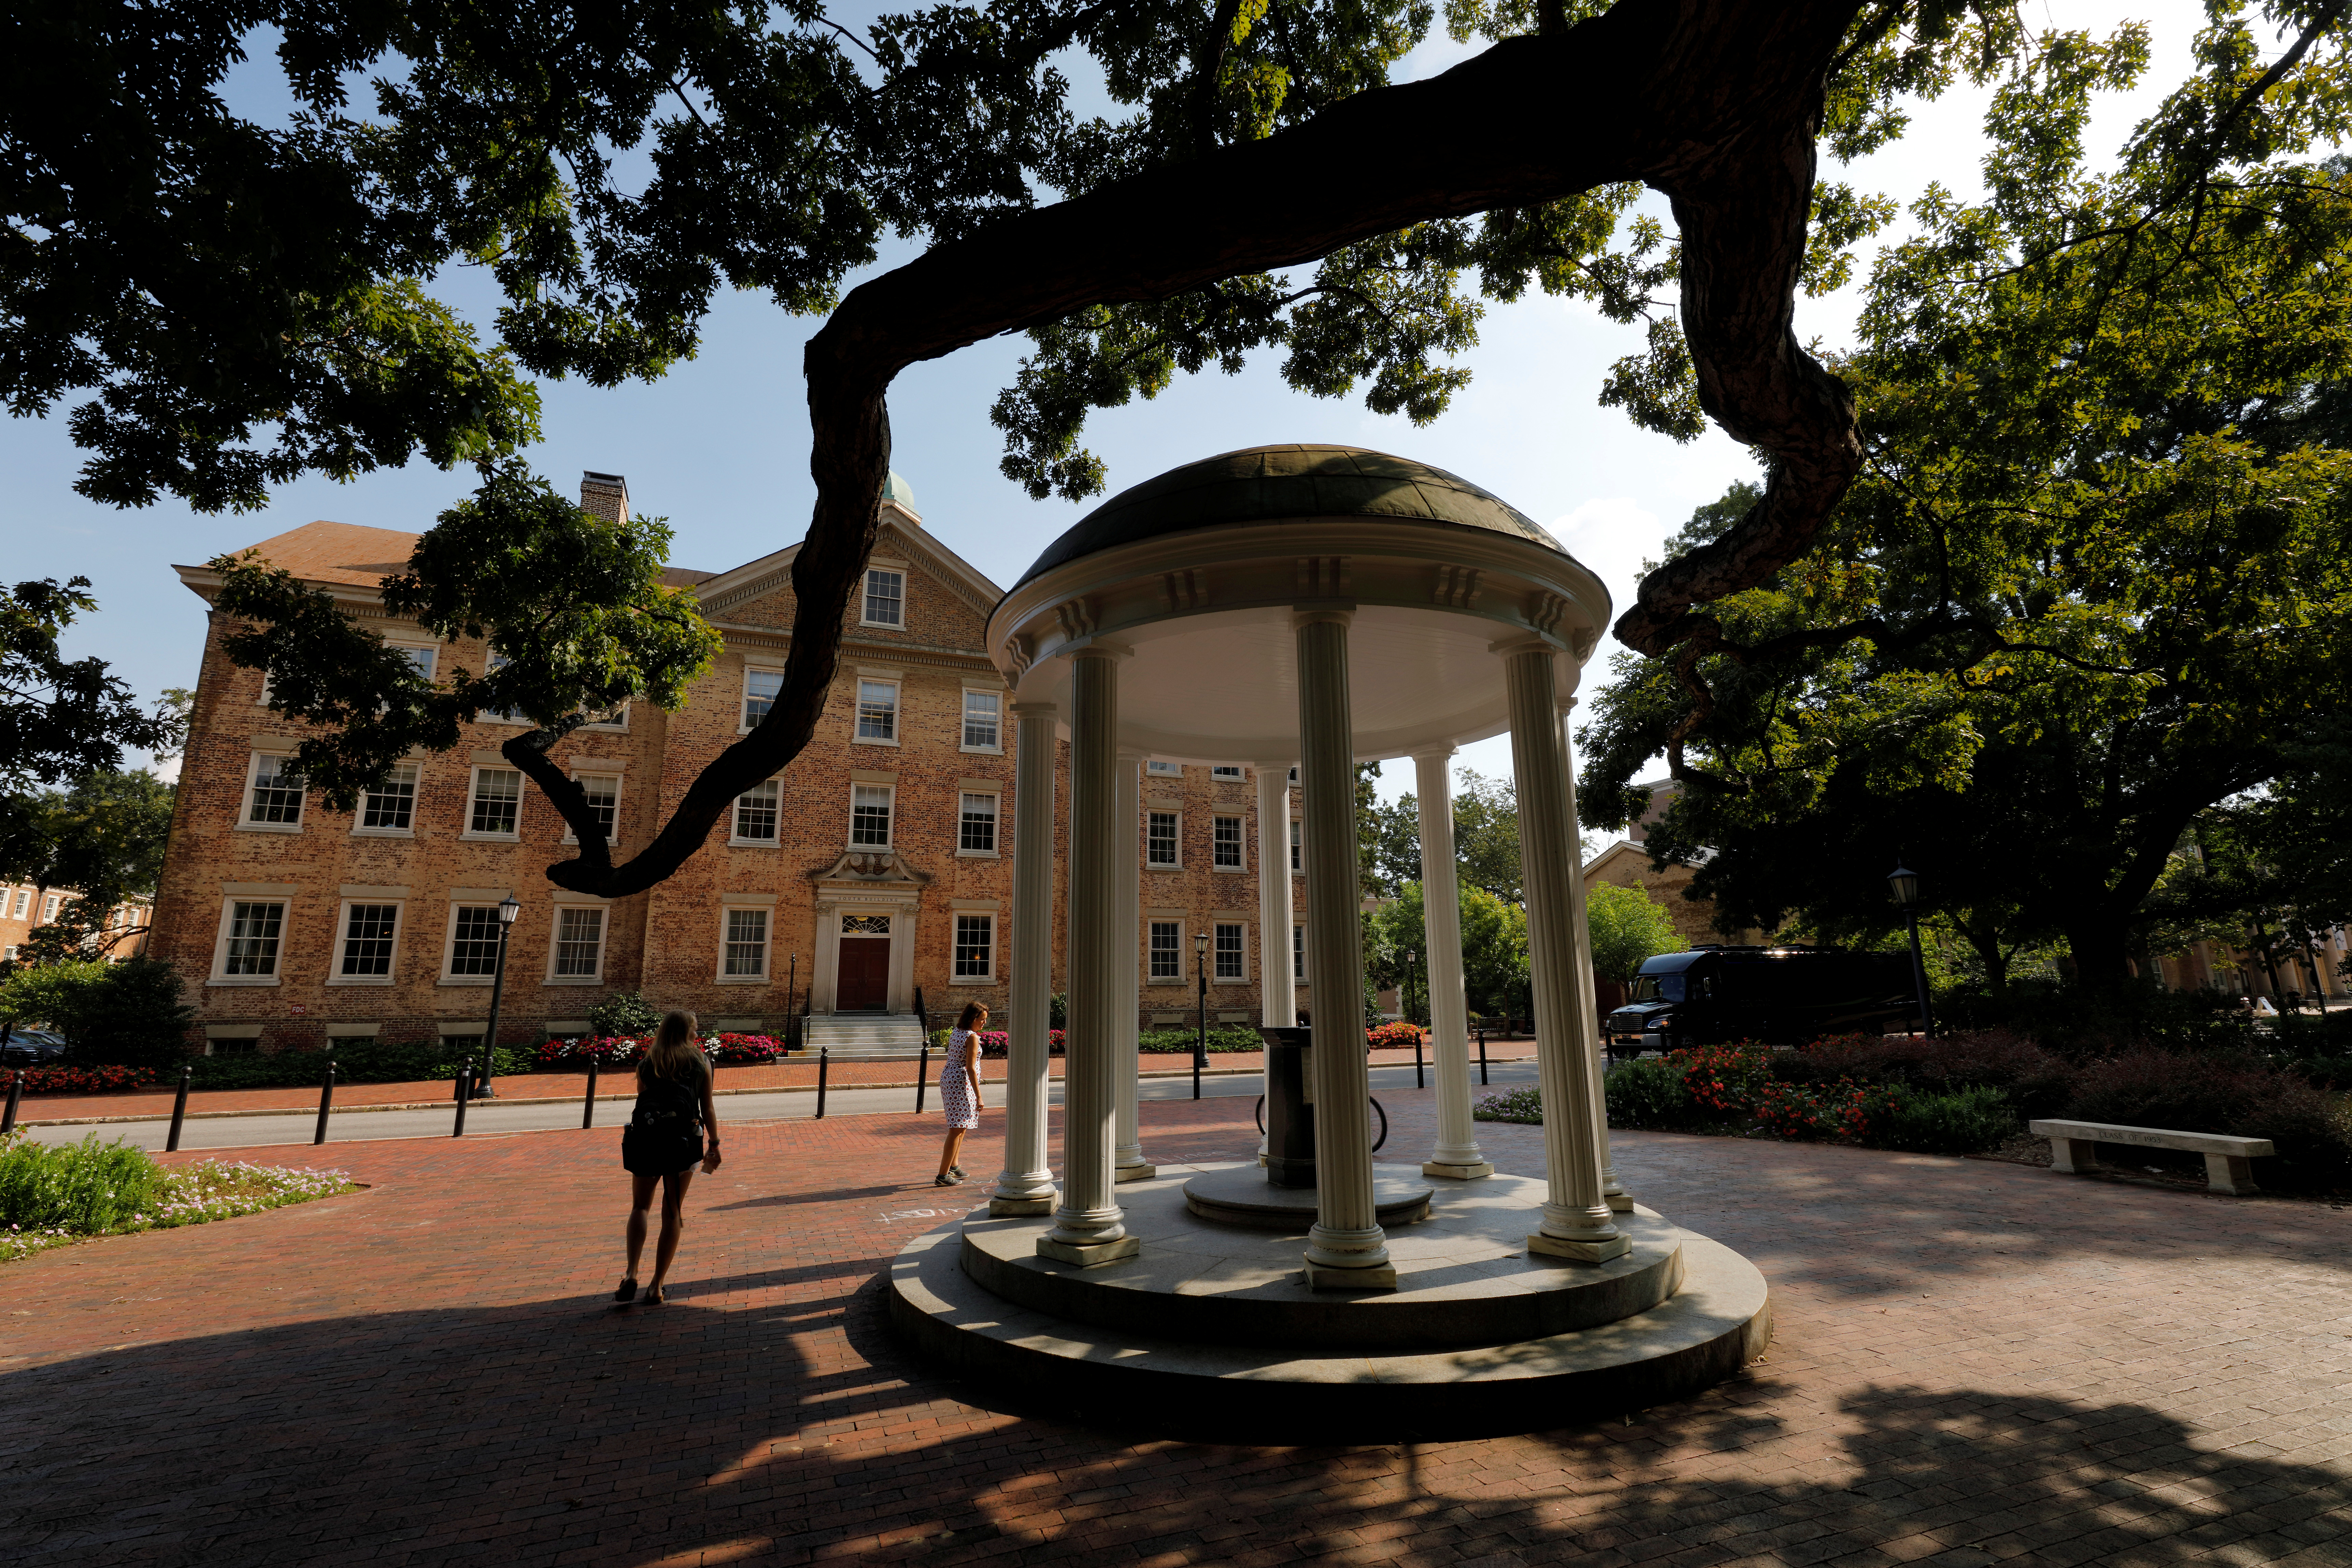 The iconic Old Well on the campus of University of North Carolina at Chapel Hill, North Carolina, U.S., September 20, 2018. Picture taken on September 20, 2018. REUTERS/Jonathan Drake